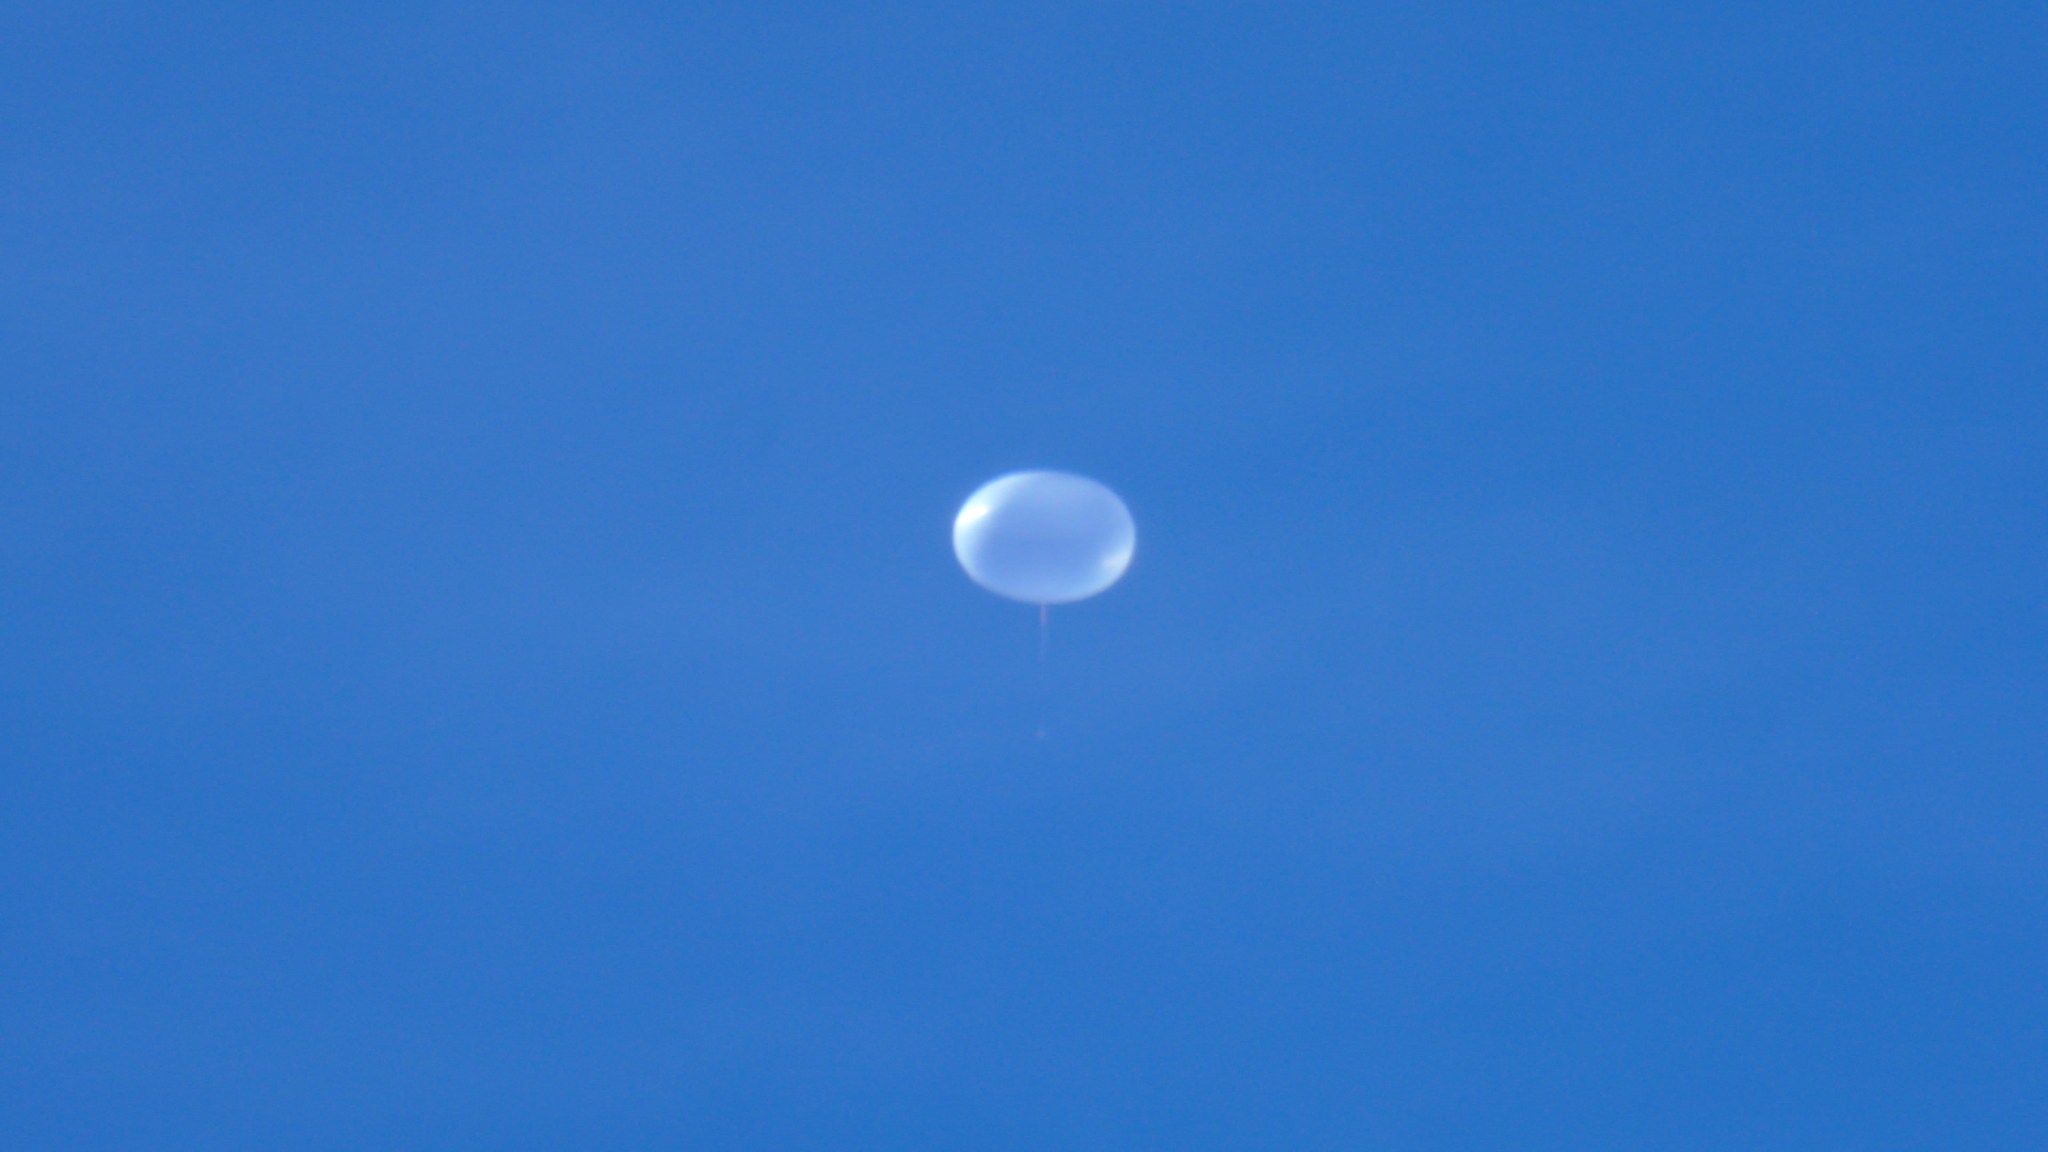 A fully inflated super pressure balloon in the sky.